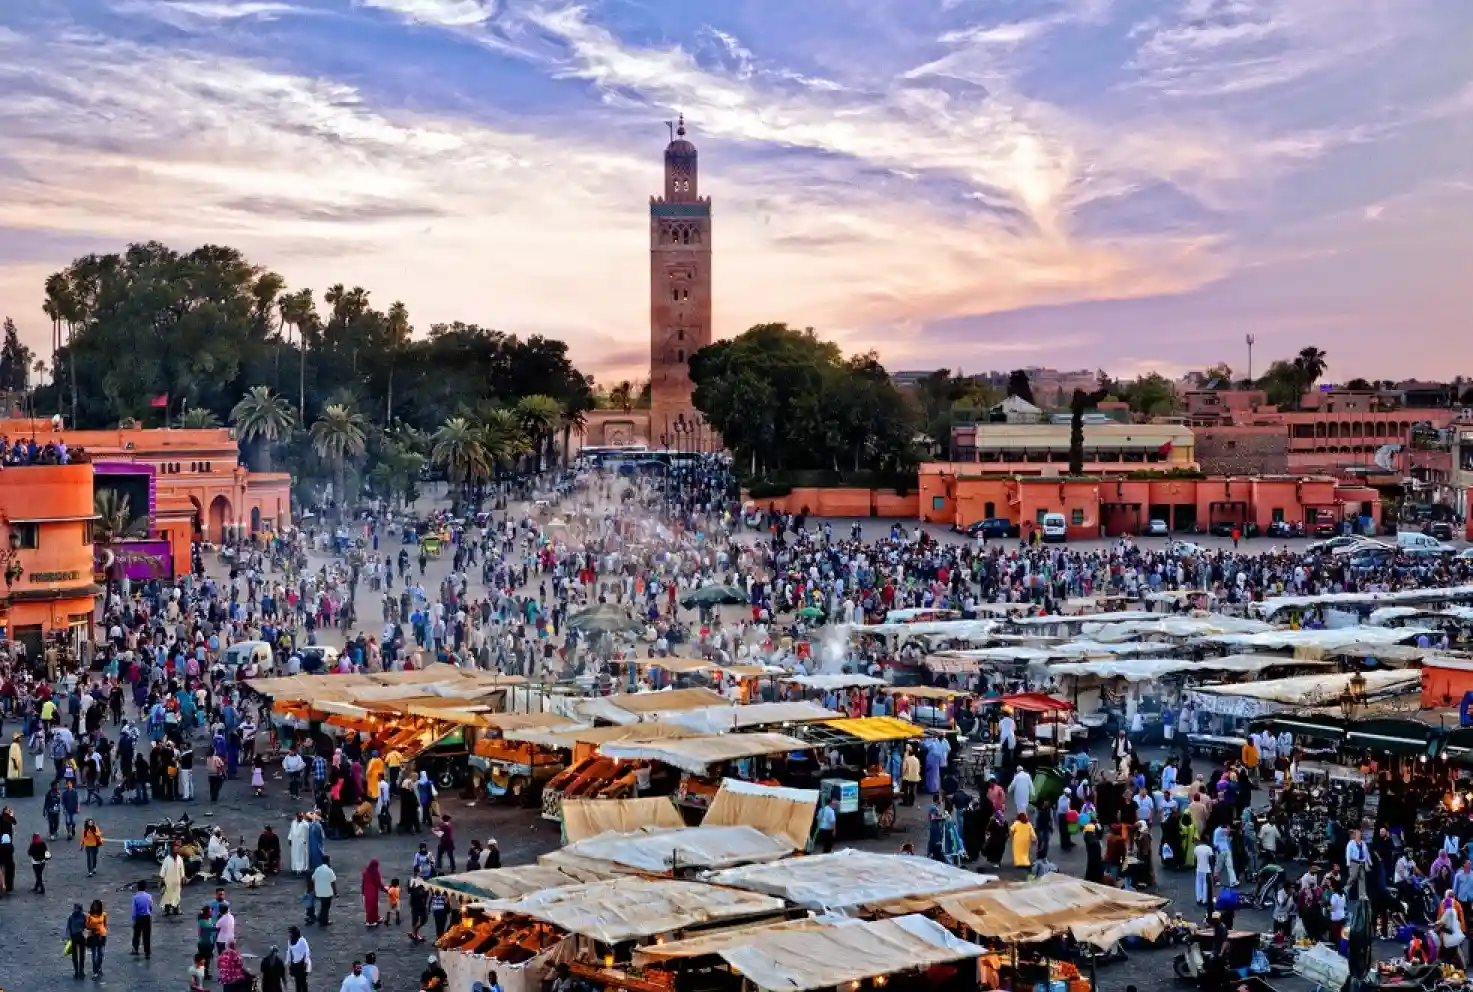 How-to-Find-Cheap-Flights-to-Morocco-from-UK.webp